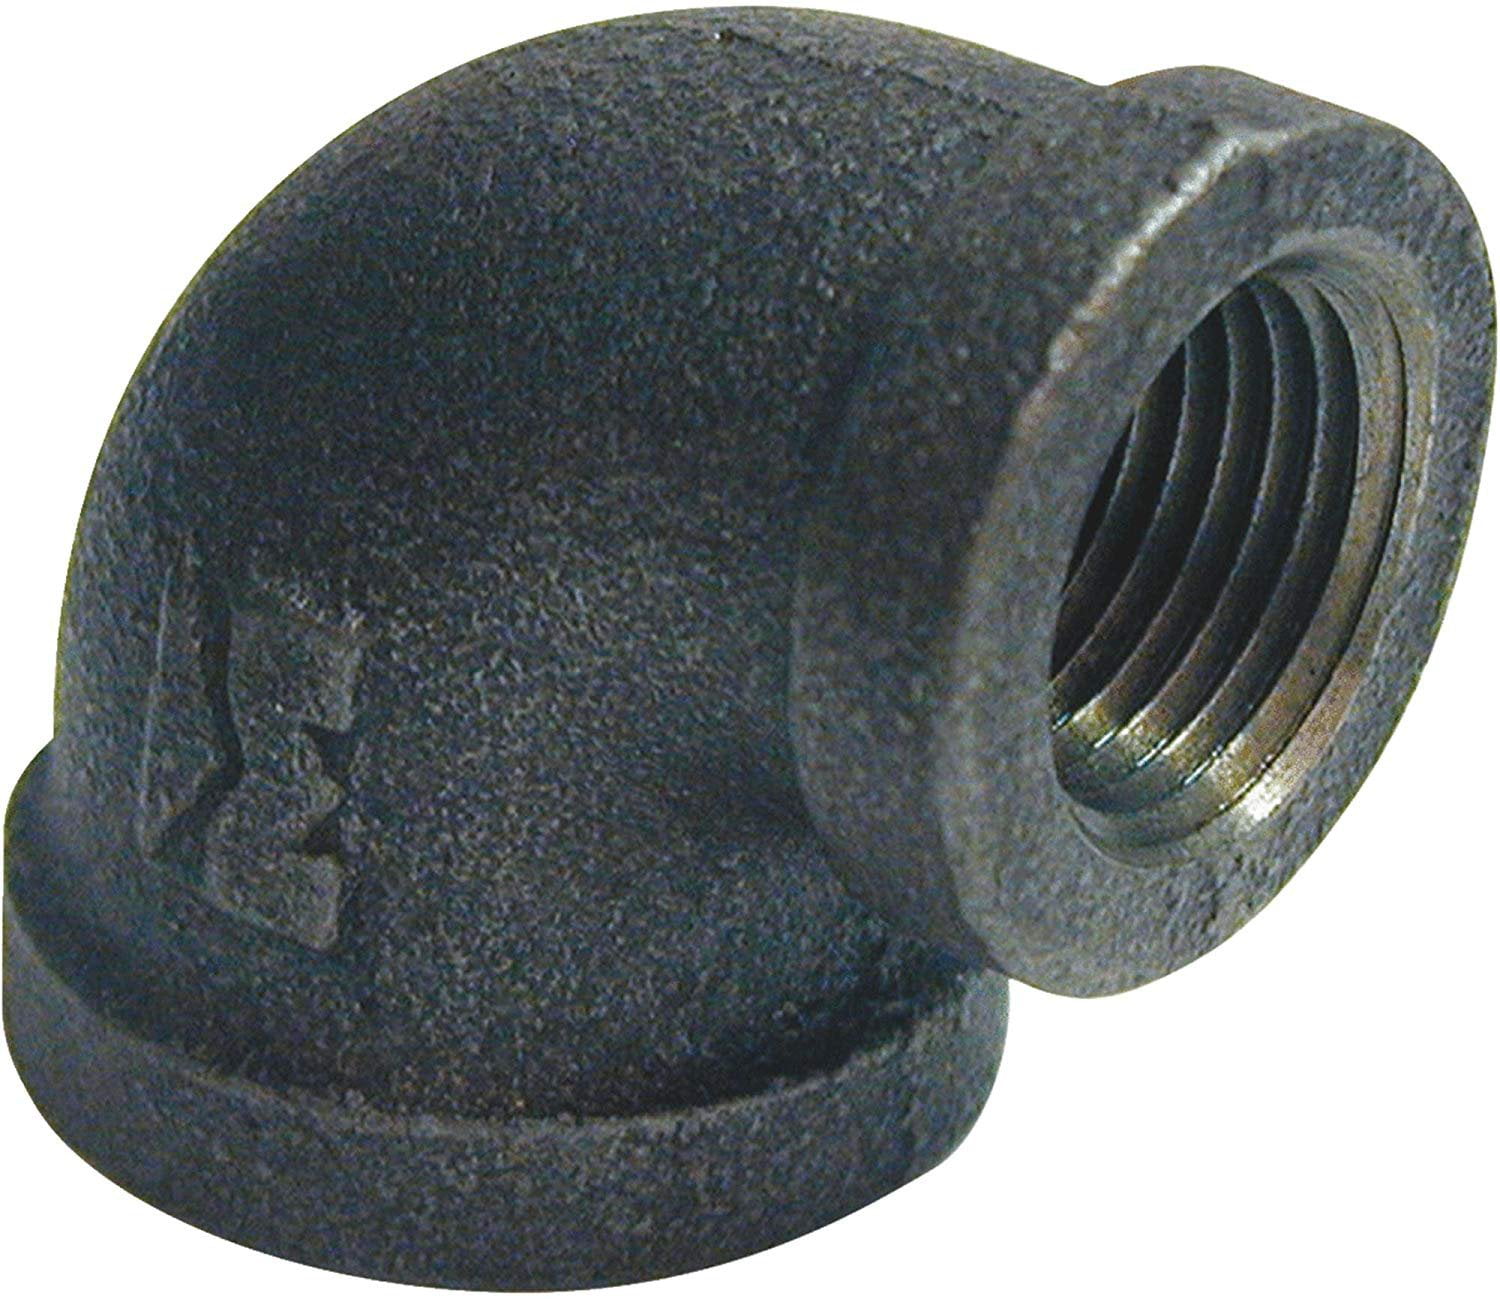 1" X 1/2" BSP Reducing Elbow 90° Female/Female Black Malleable Iron Fitting